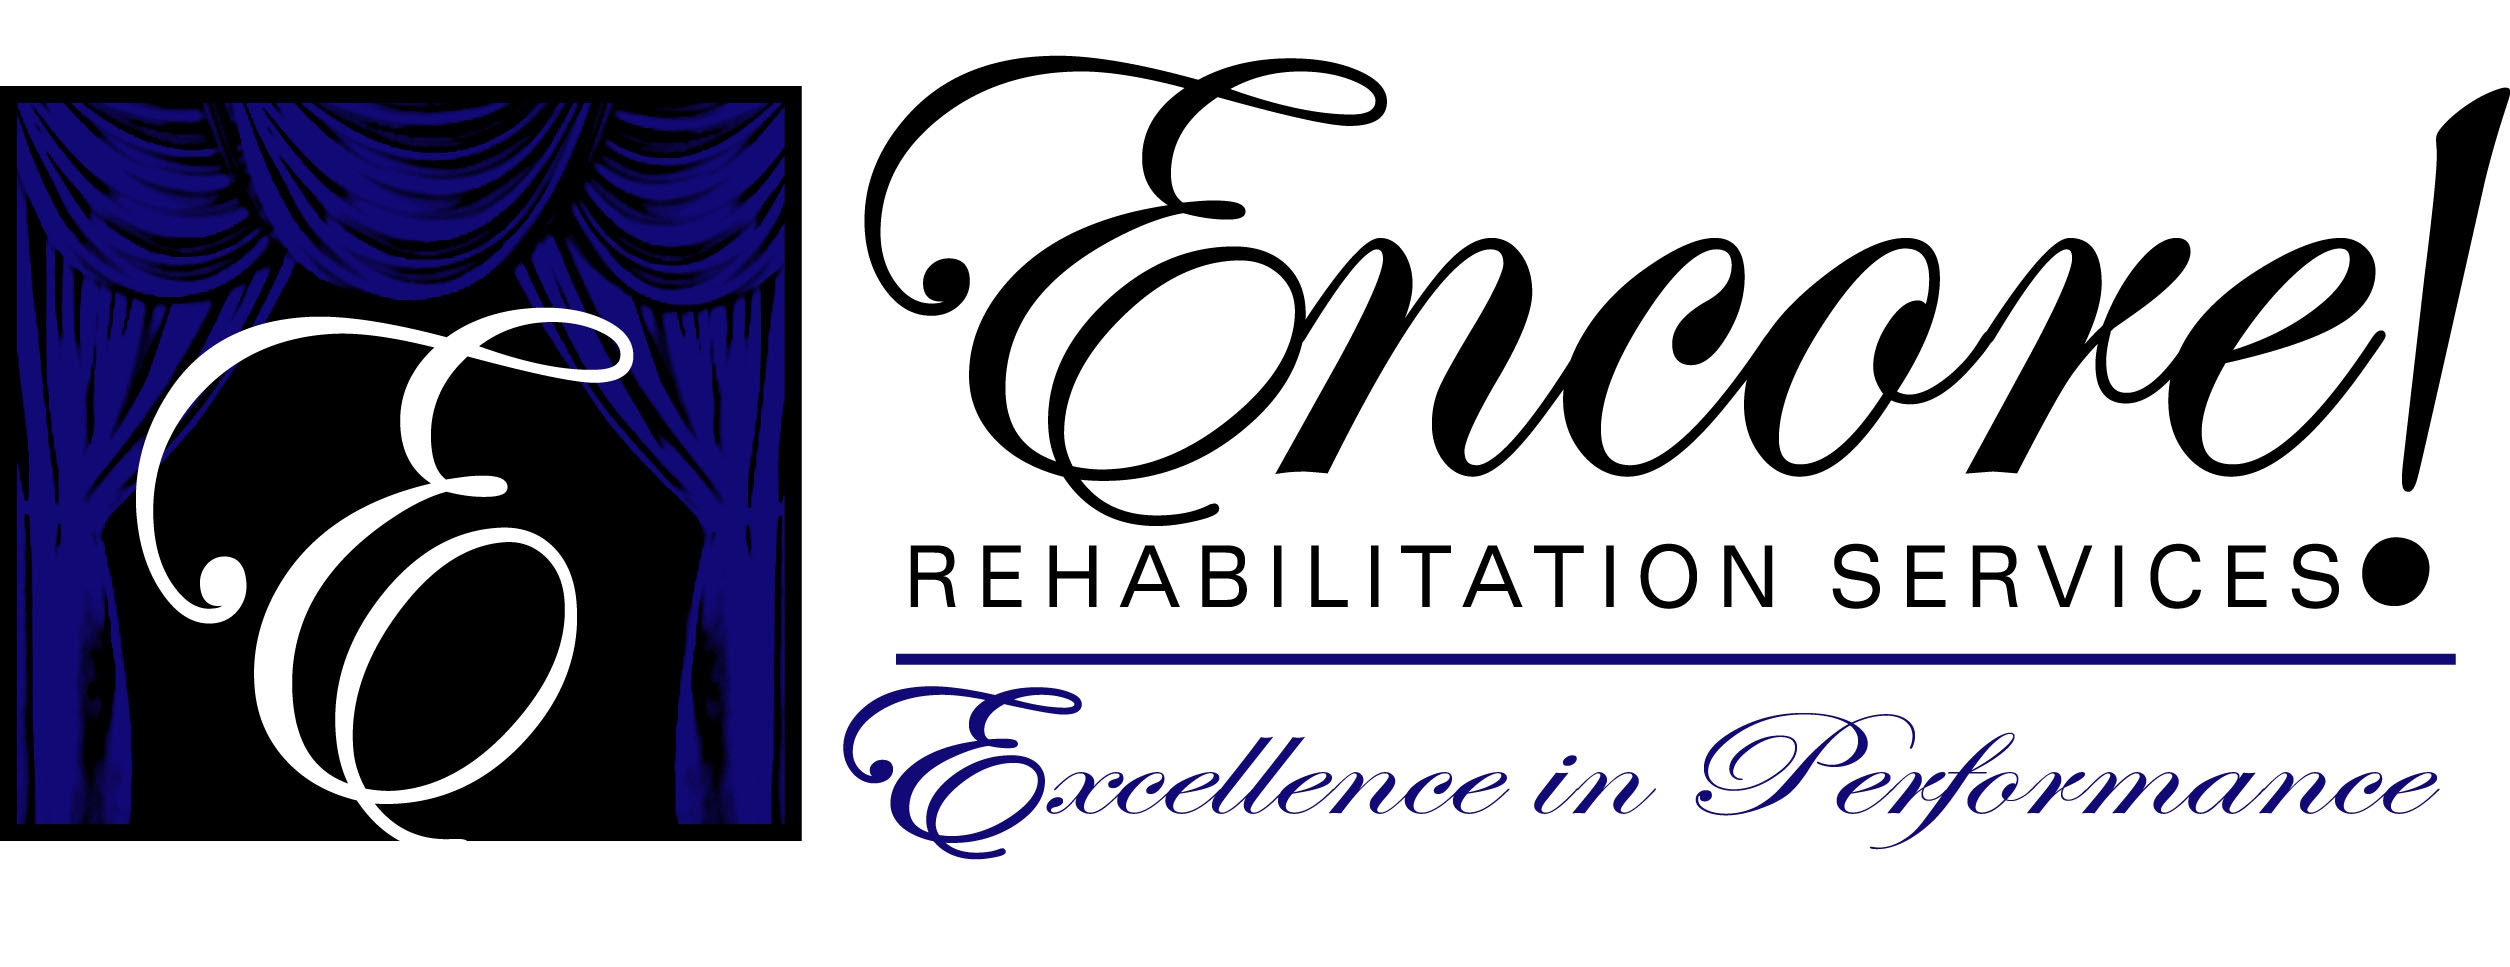 Student Clinical Affiliation…a Successful, Replicable Model by Encore Rehabilitation